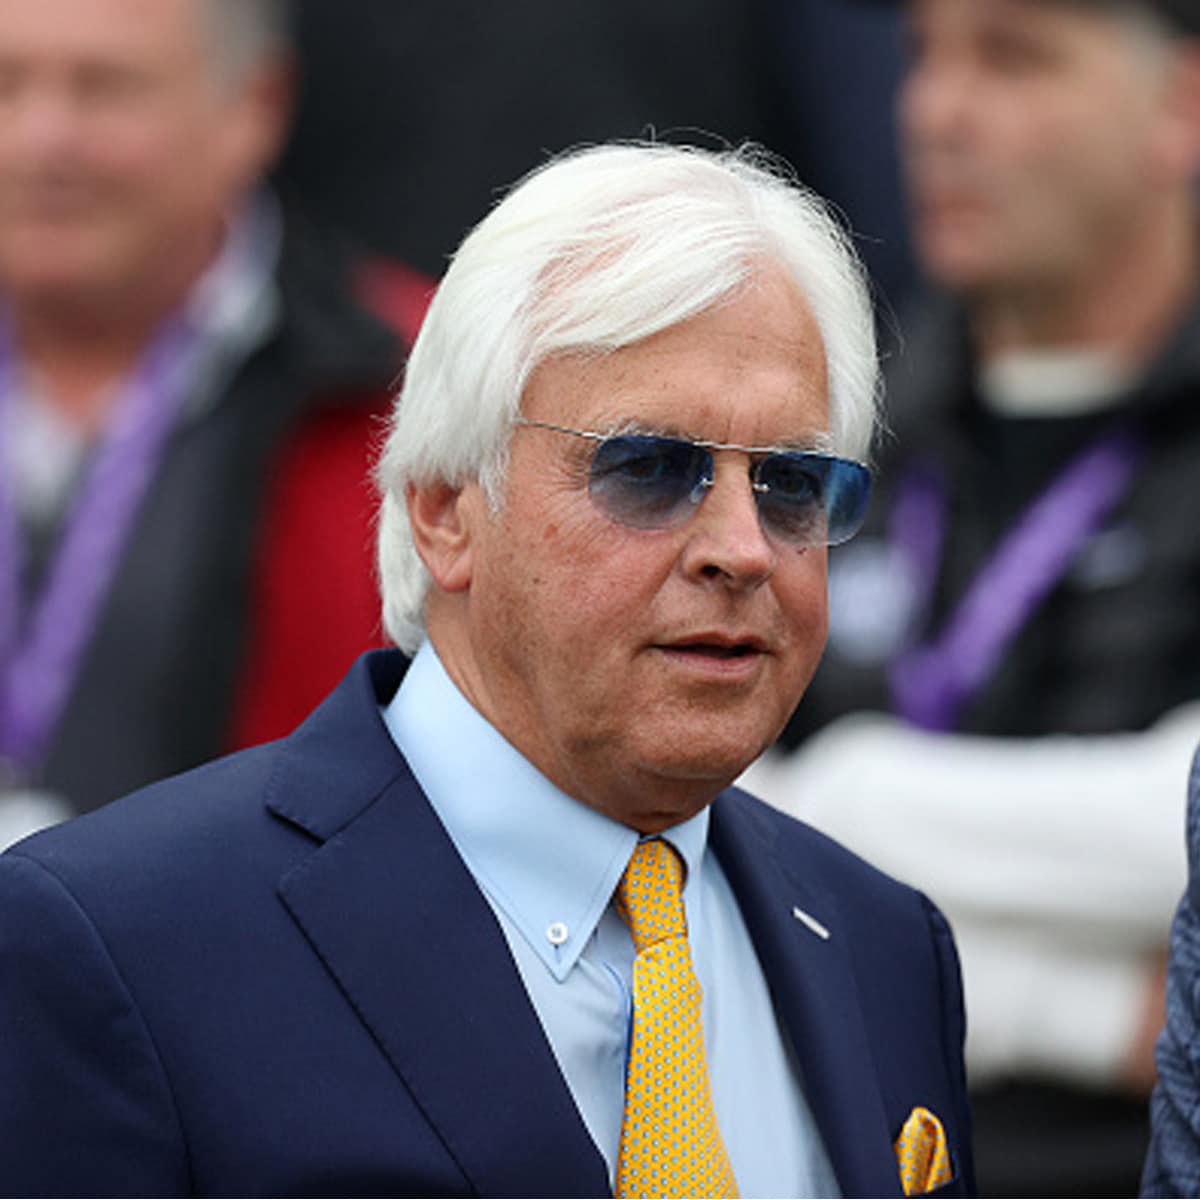 racehorse trainer bob baffert at the breeders cup in 2021